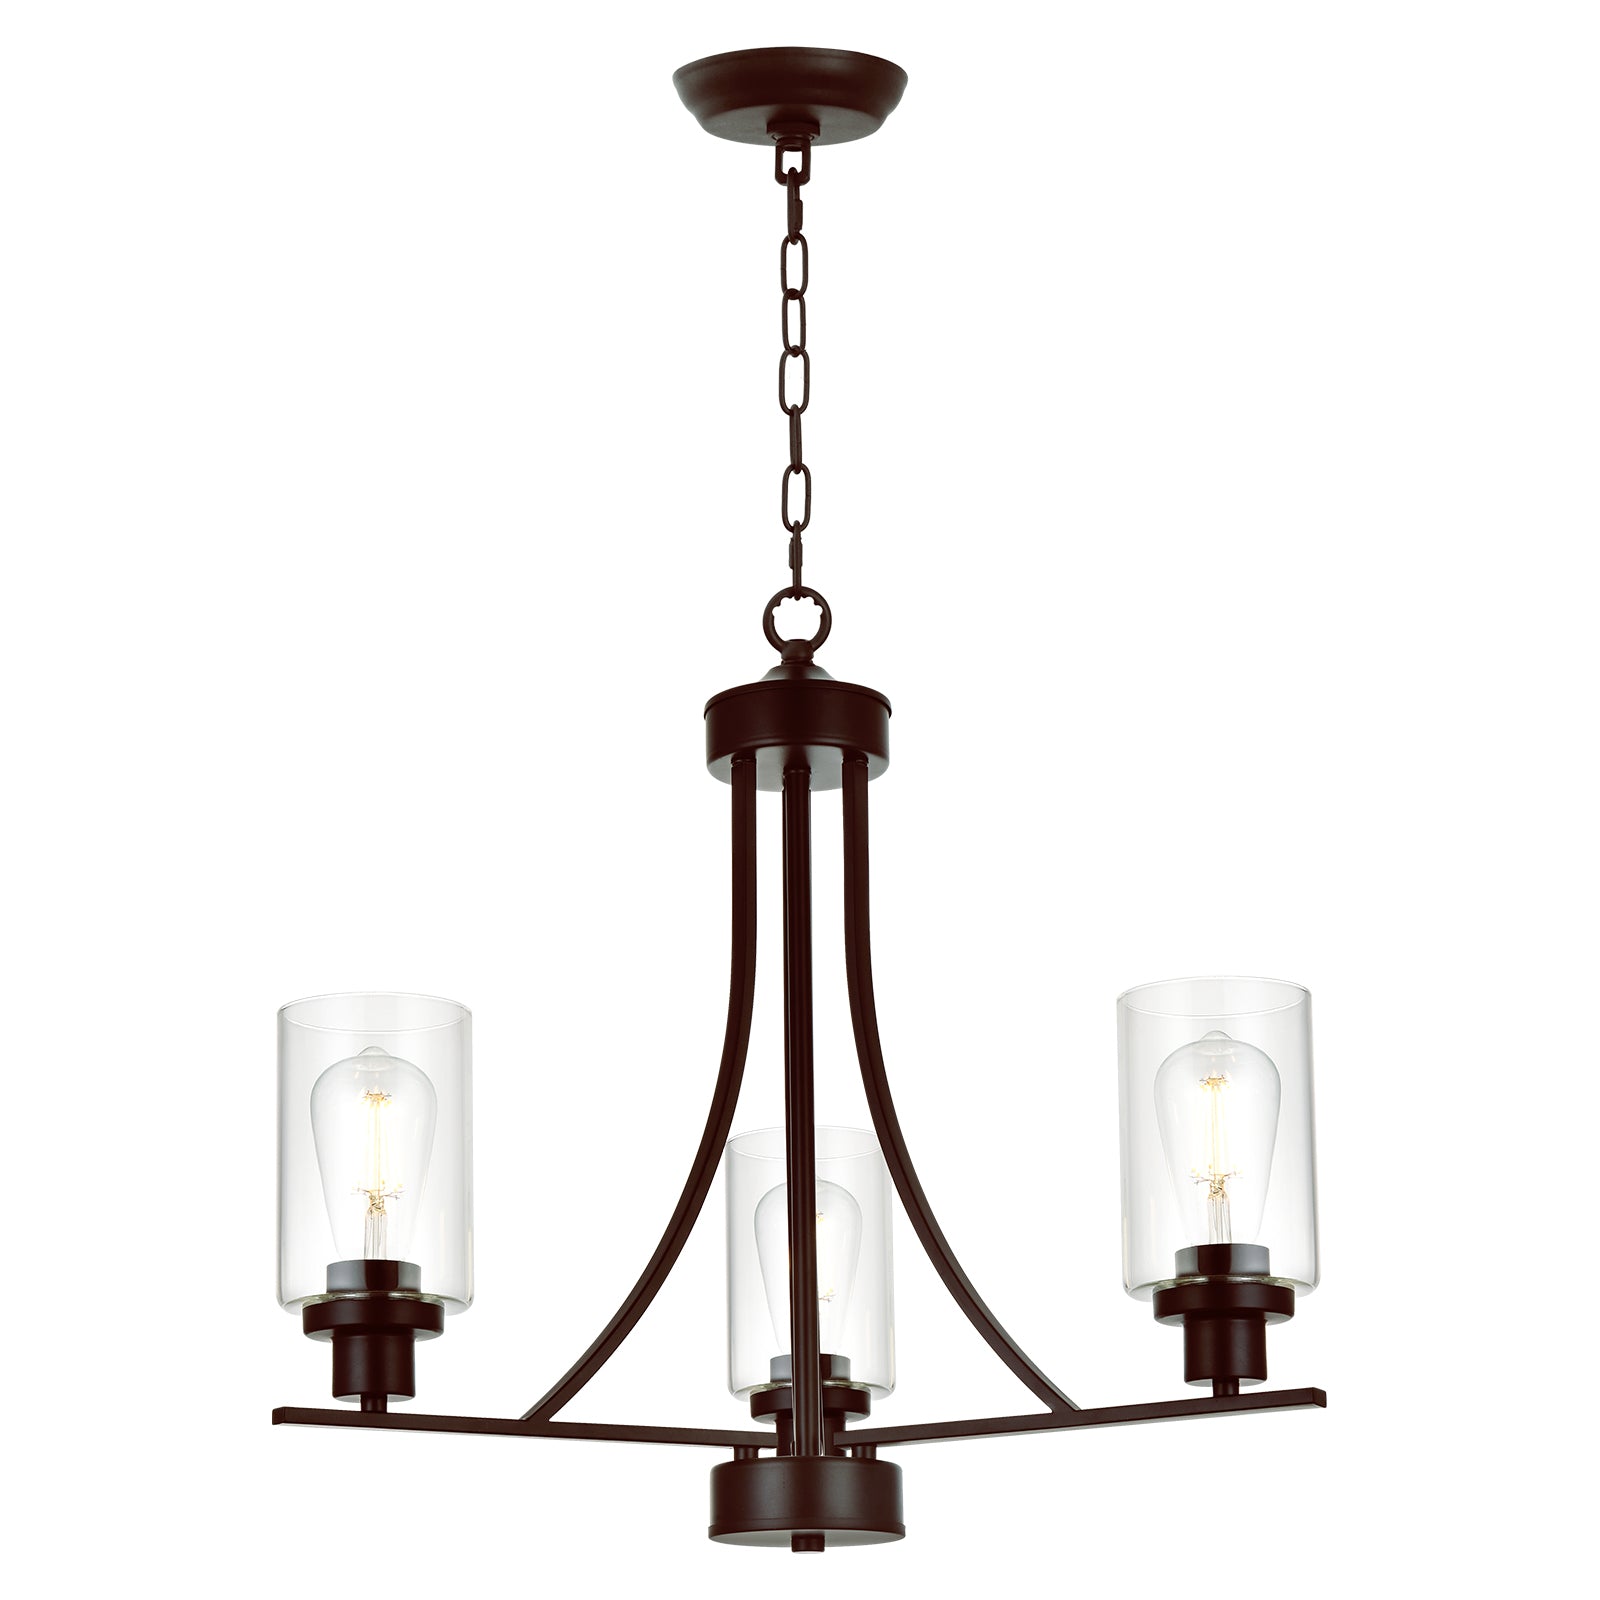 3 Lights Oil-Rubbed Bronze Traditional Chandelier Rustic Kitchen Island Lighting Fixtures Hanging Clear Glass Cylinder Pendant Lights Classic Ceiling Light for Dining Room Bedroom Foyer